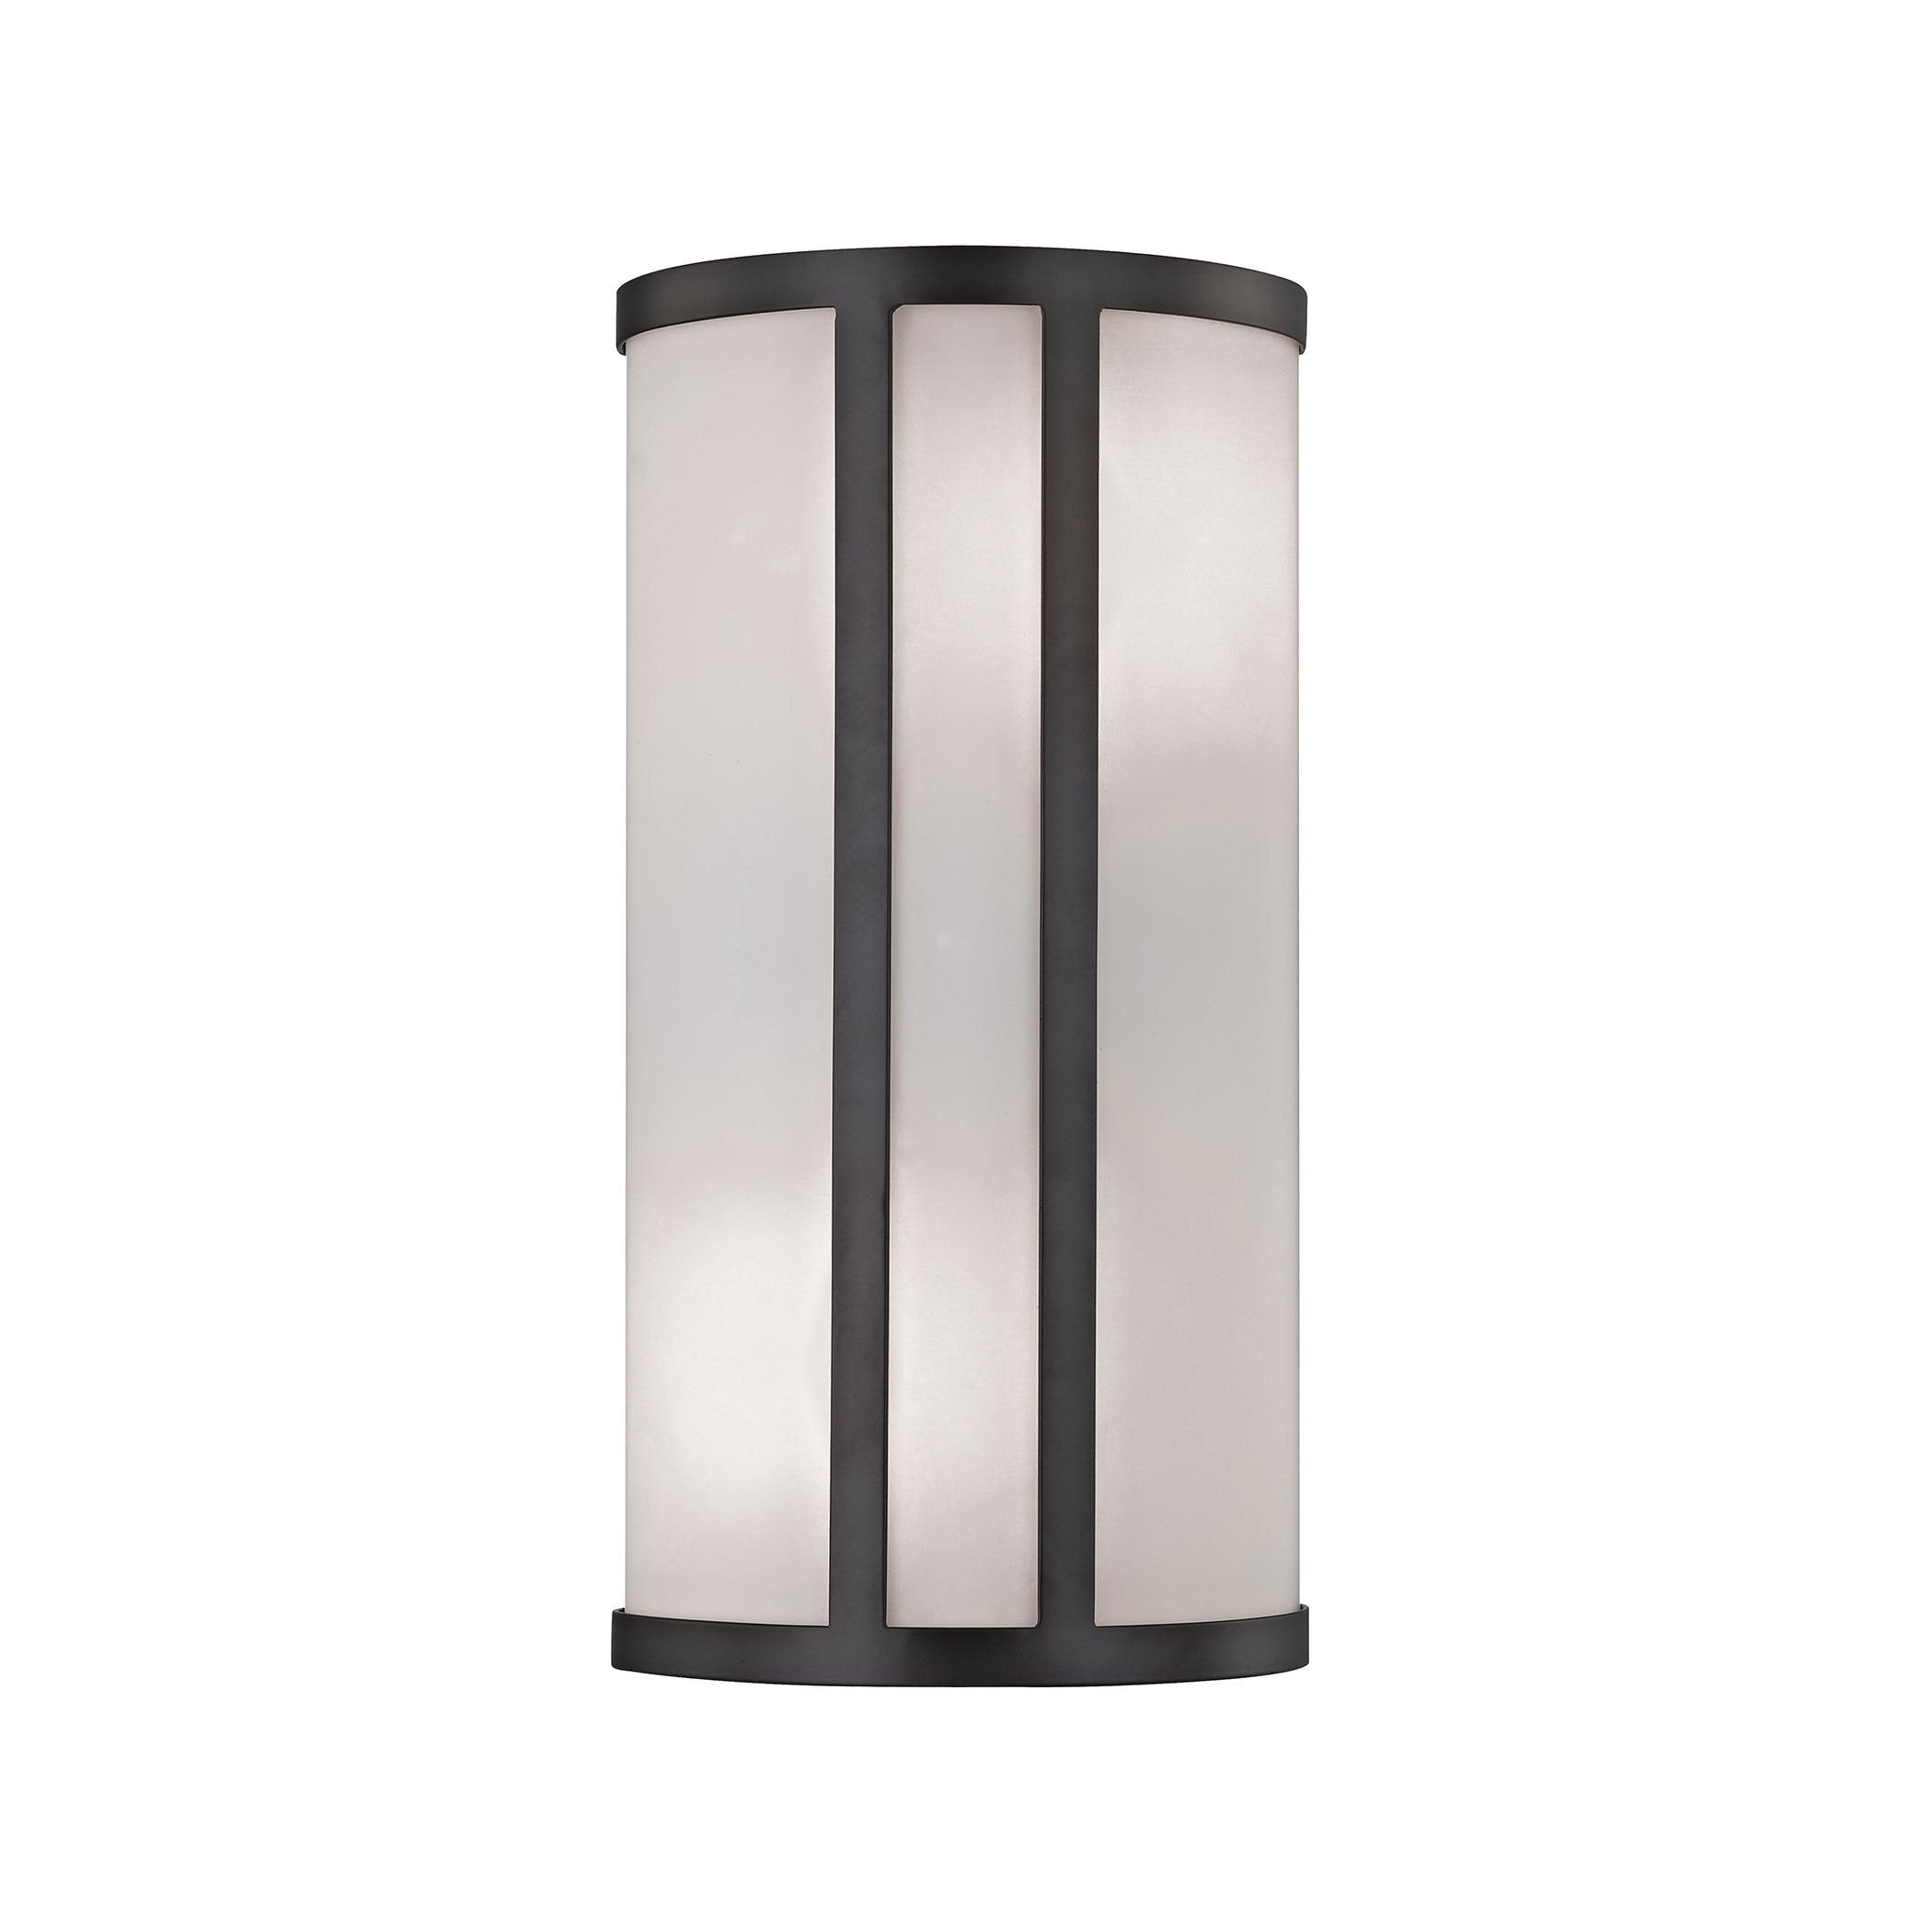 Bella 2-Light Wall Sconce in Oil Rubbed Bronze with White Glass Diffuser Wall Thomas Lighting 